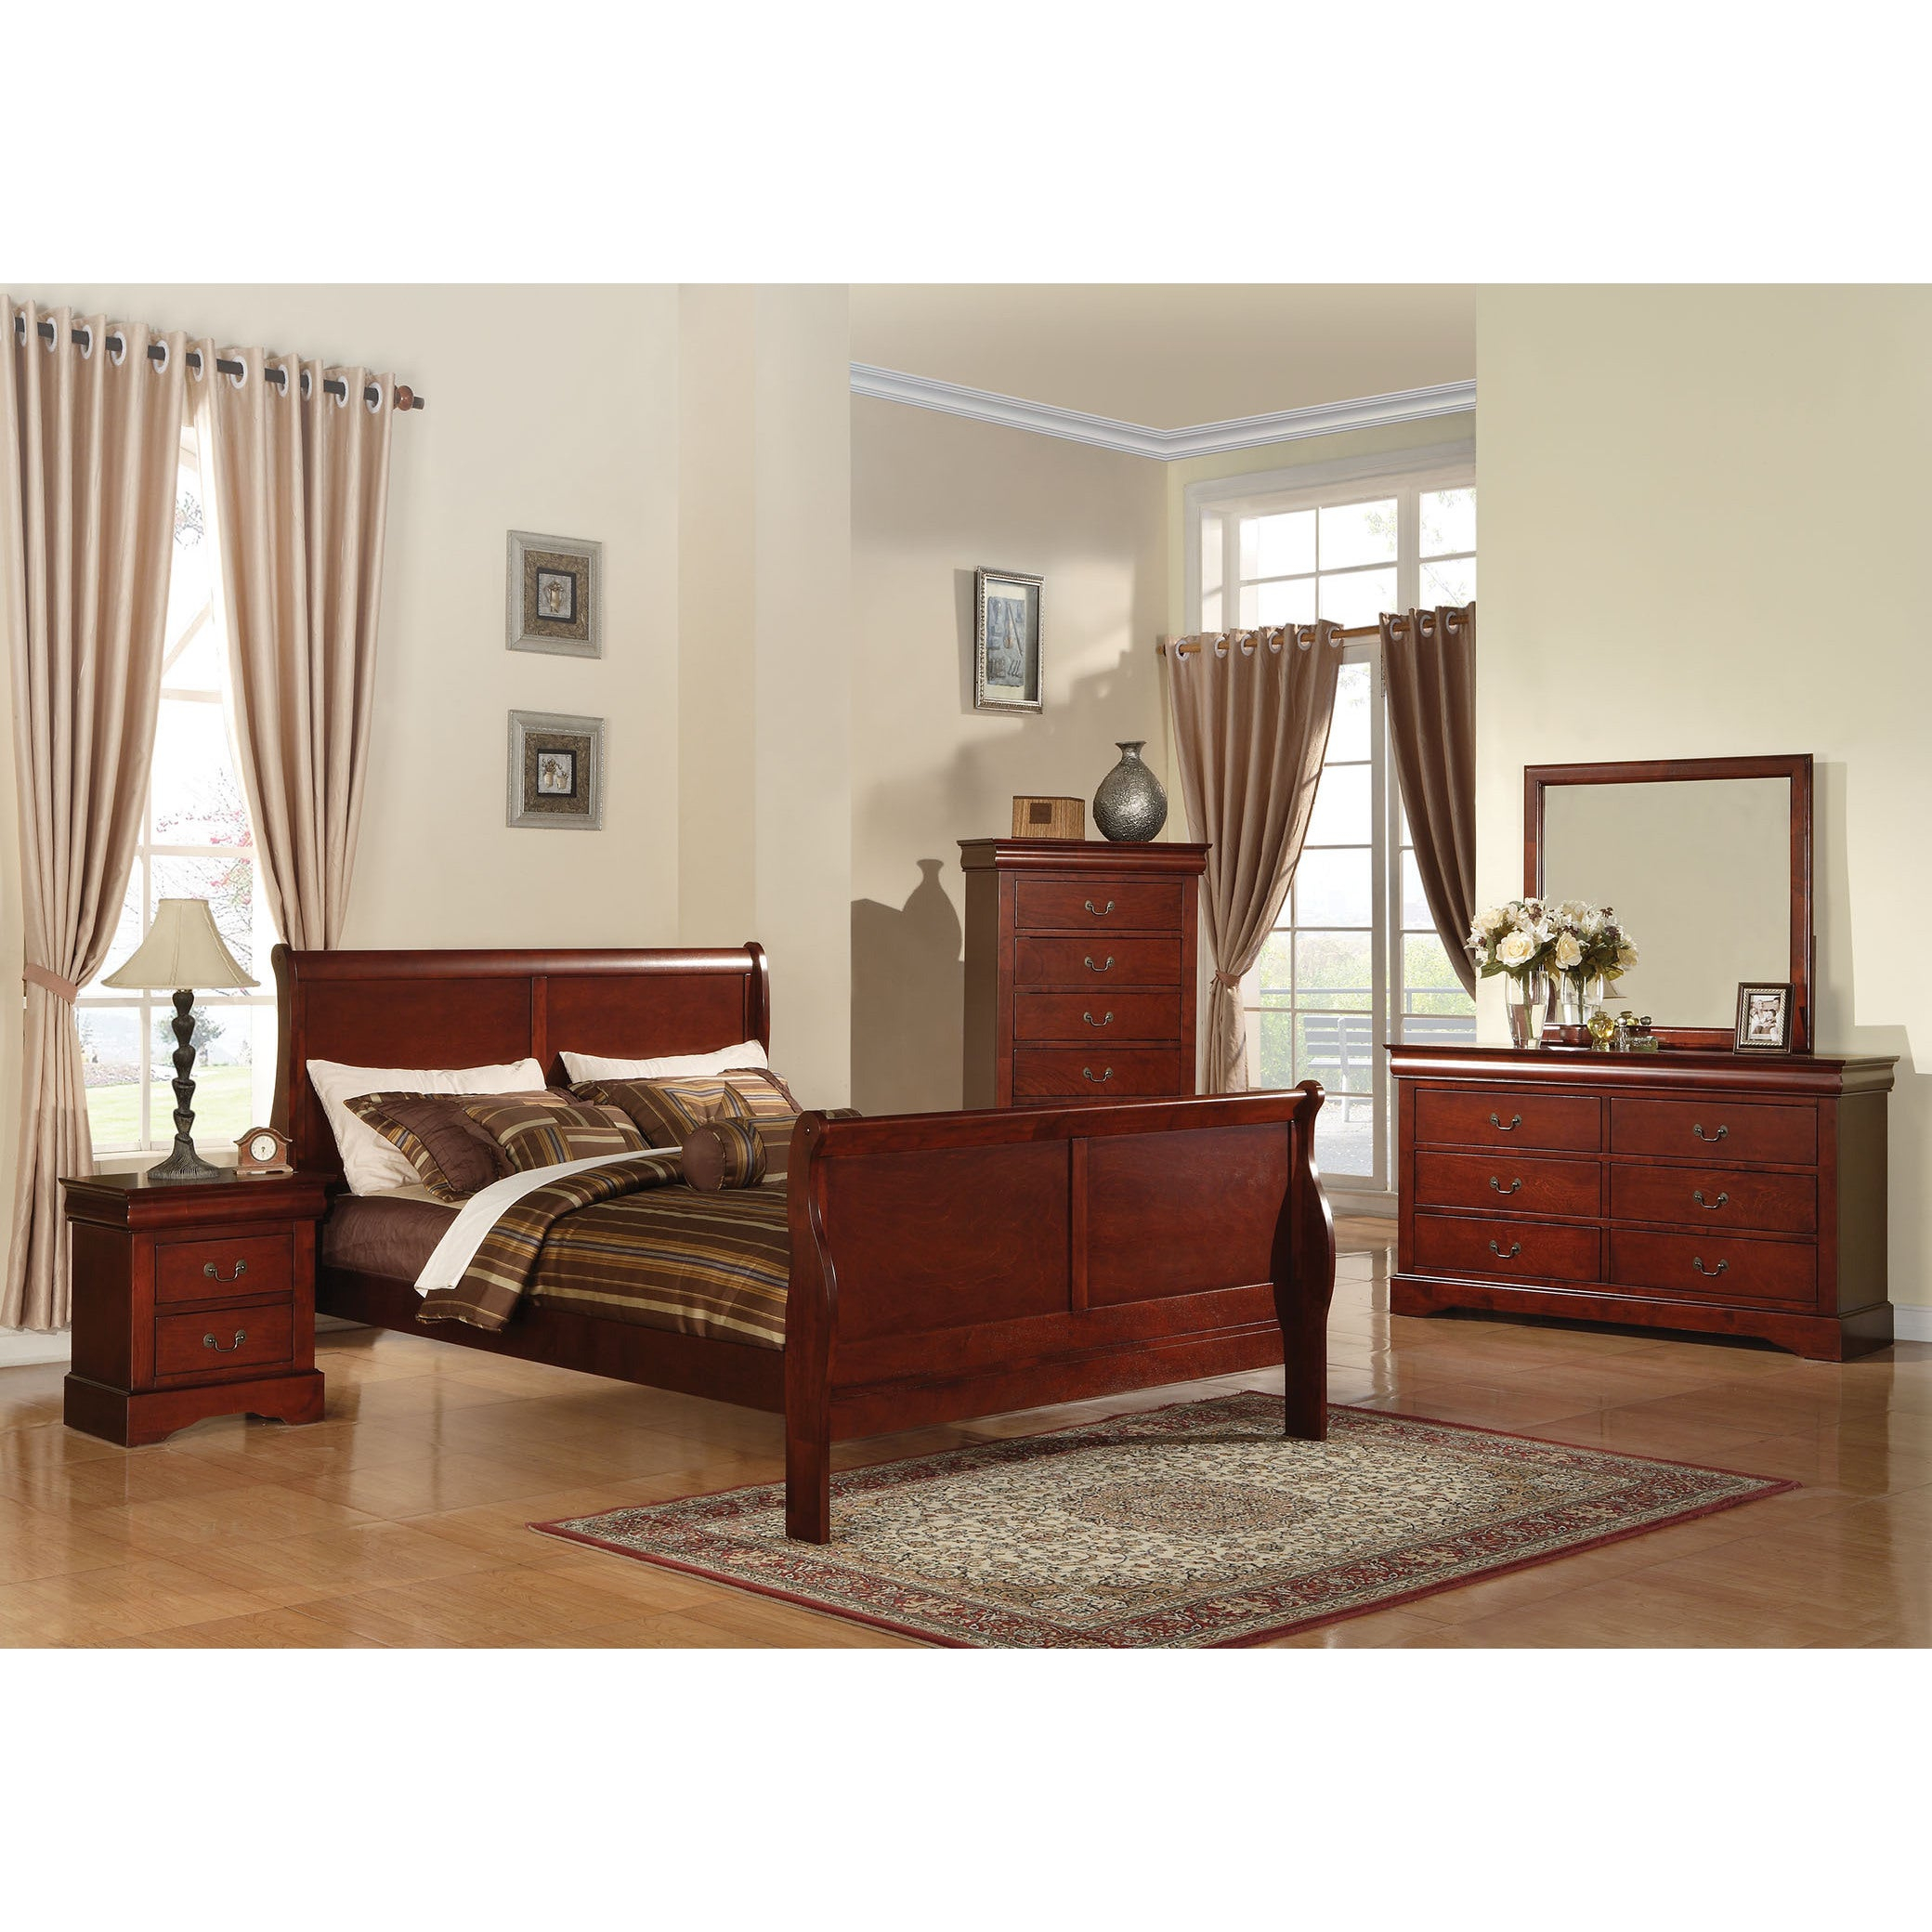 Acme Furniture Louis Philippe Iii 4 Piece Cherry Bedroom Set pertaining to proportions 2080 X 2080